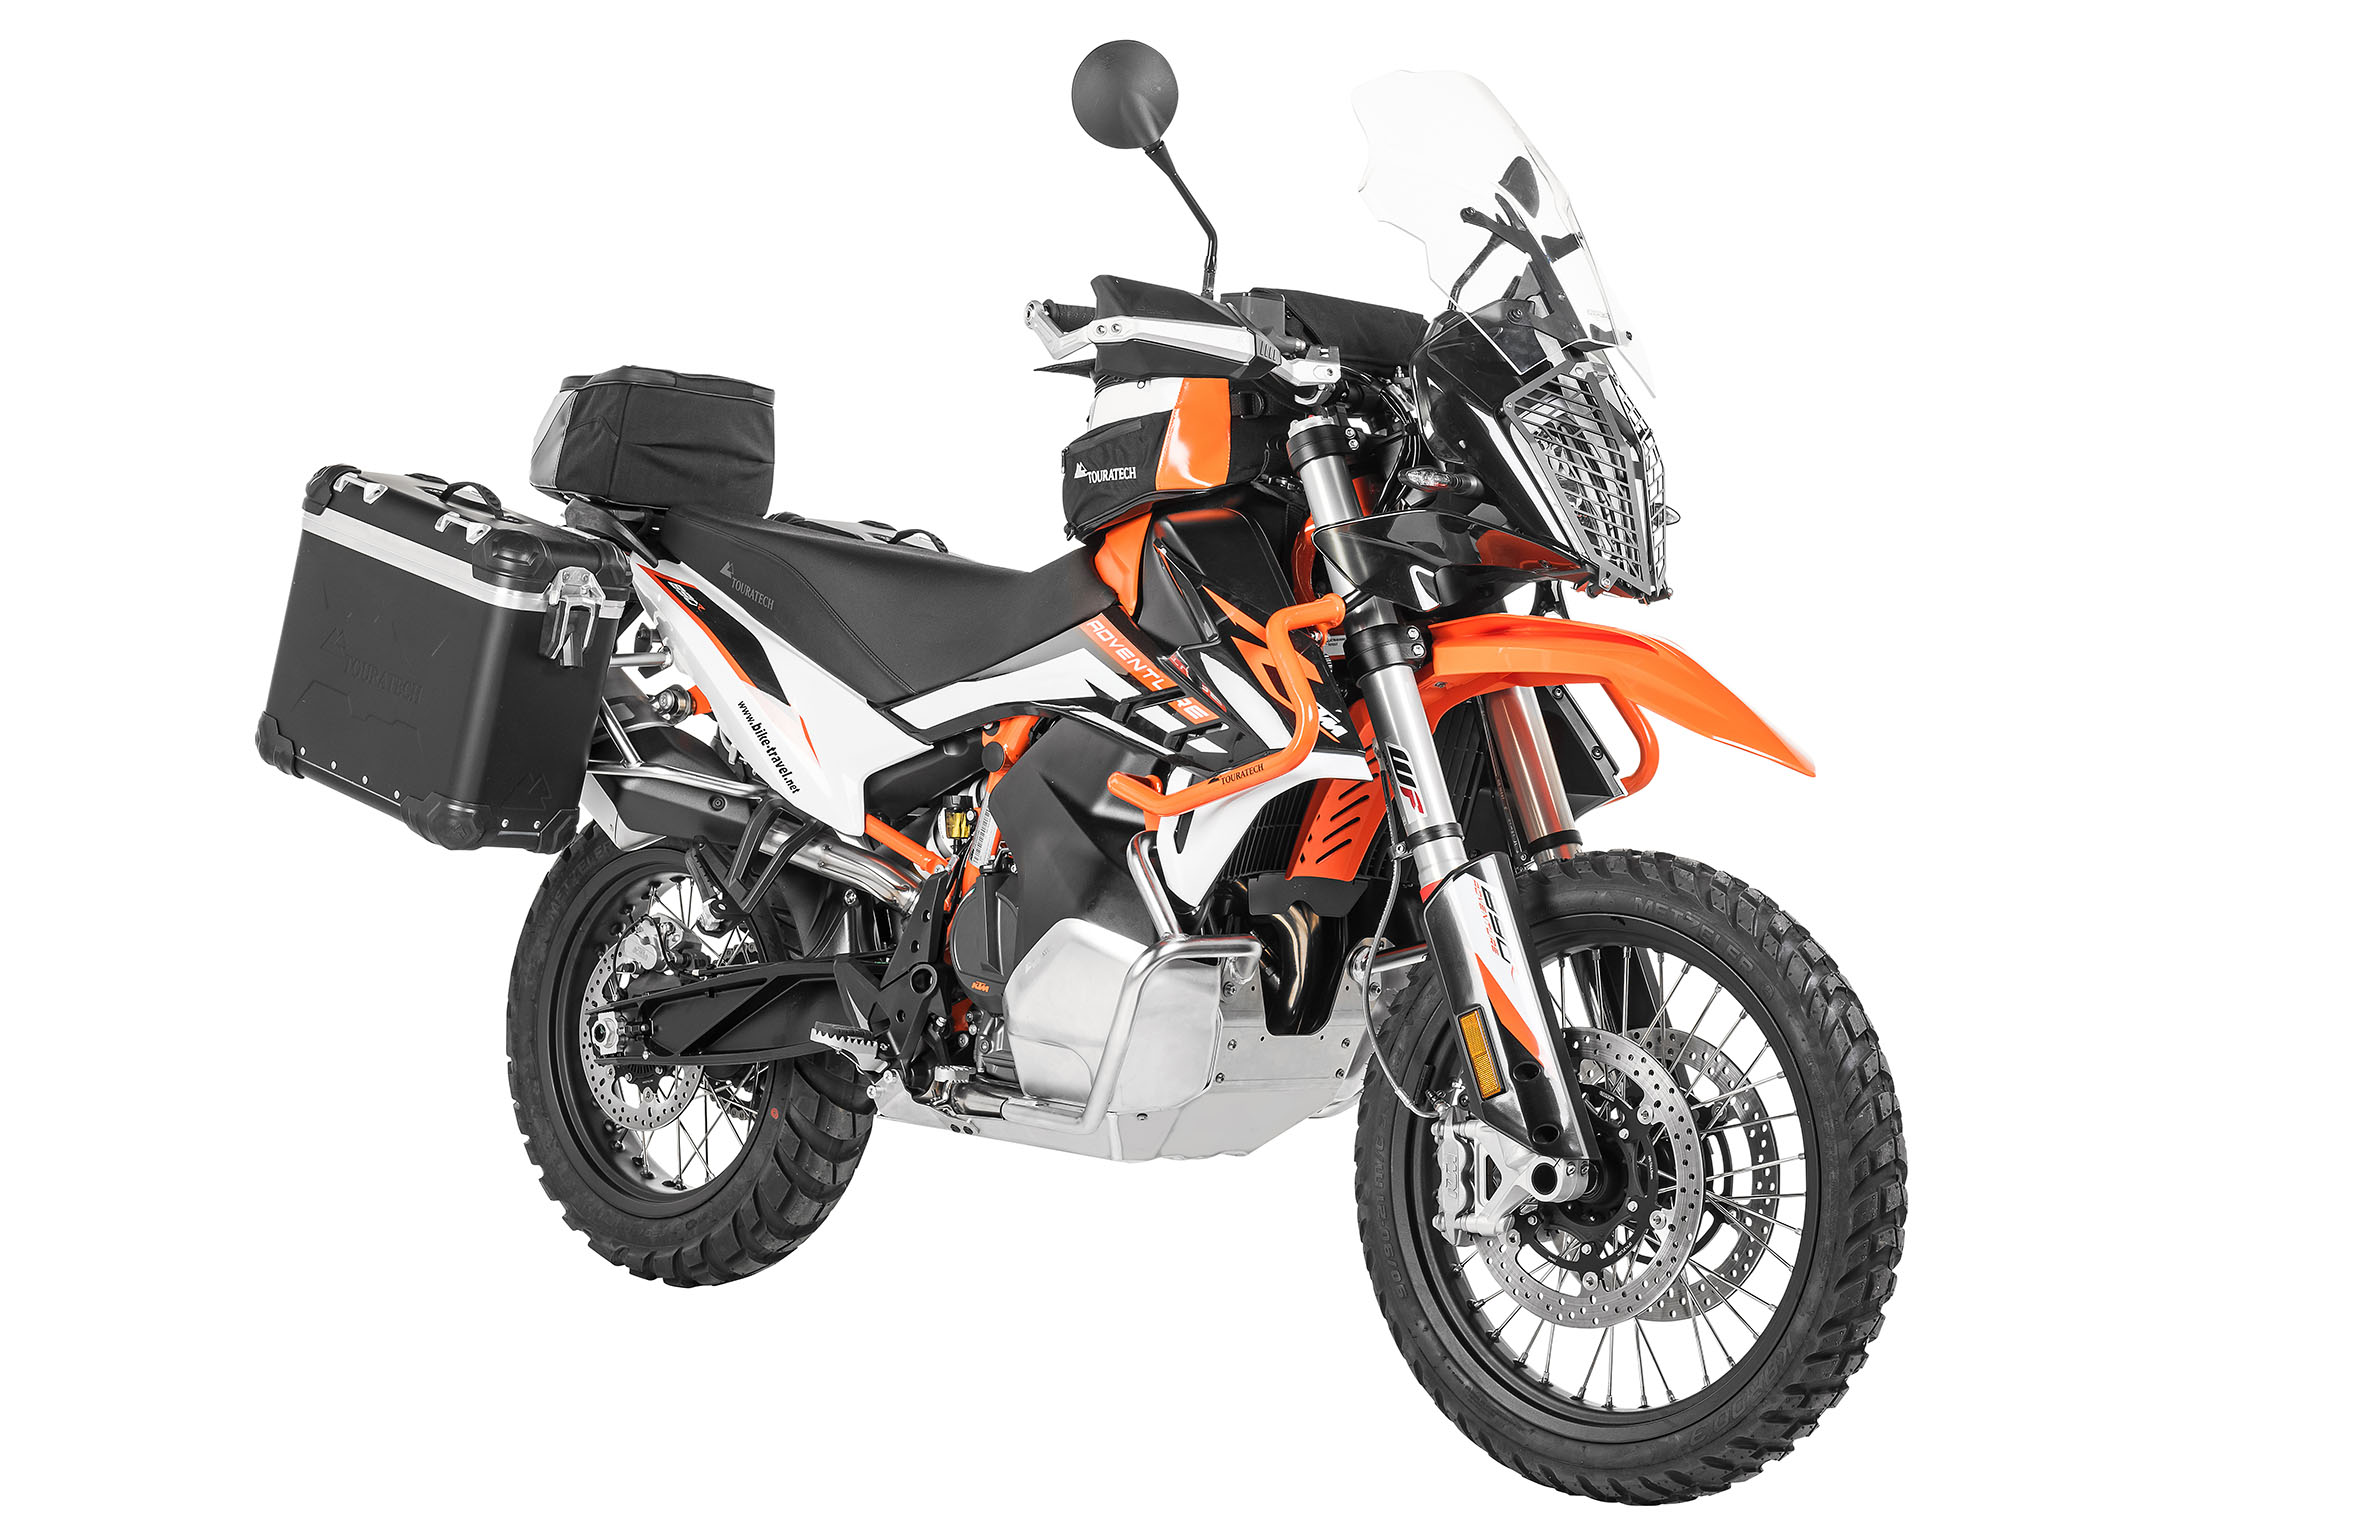 Touratech Accessories for KTM 890 Adventure